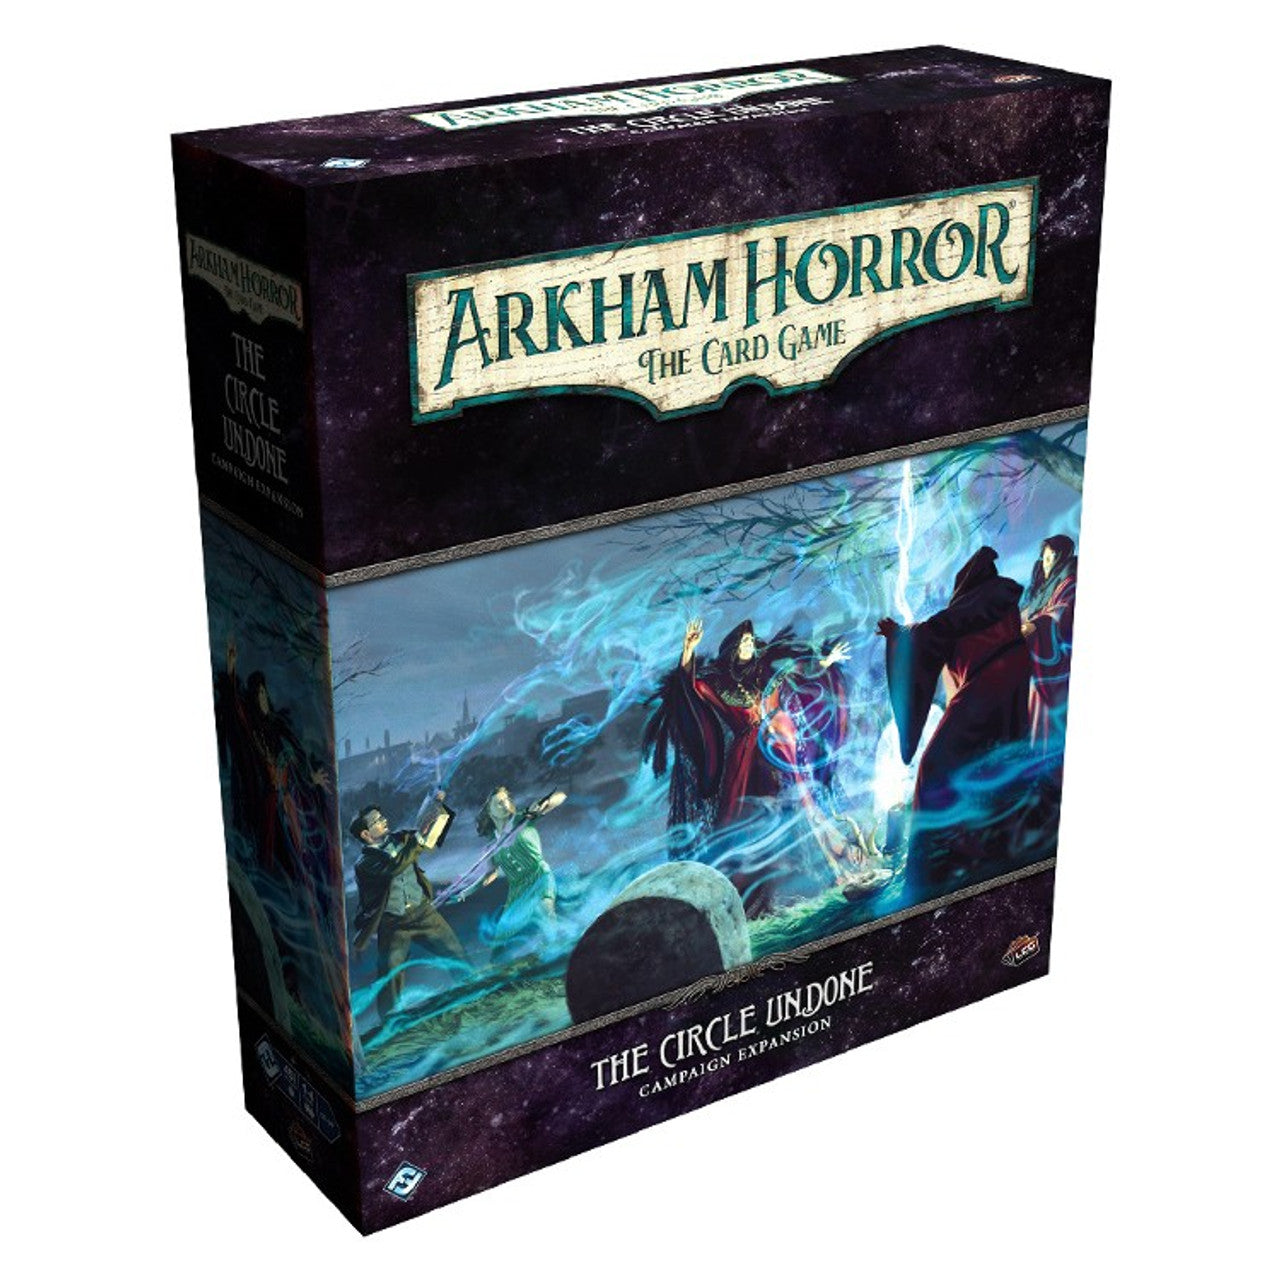 Arkham Horror - The Card Game: The Circle Undone Campaign Expansion